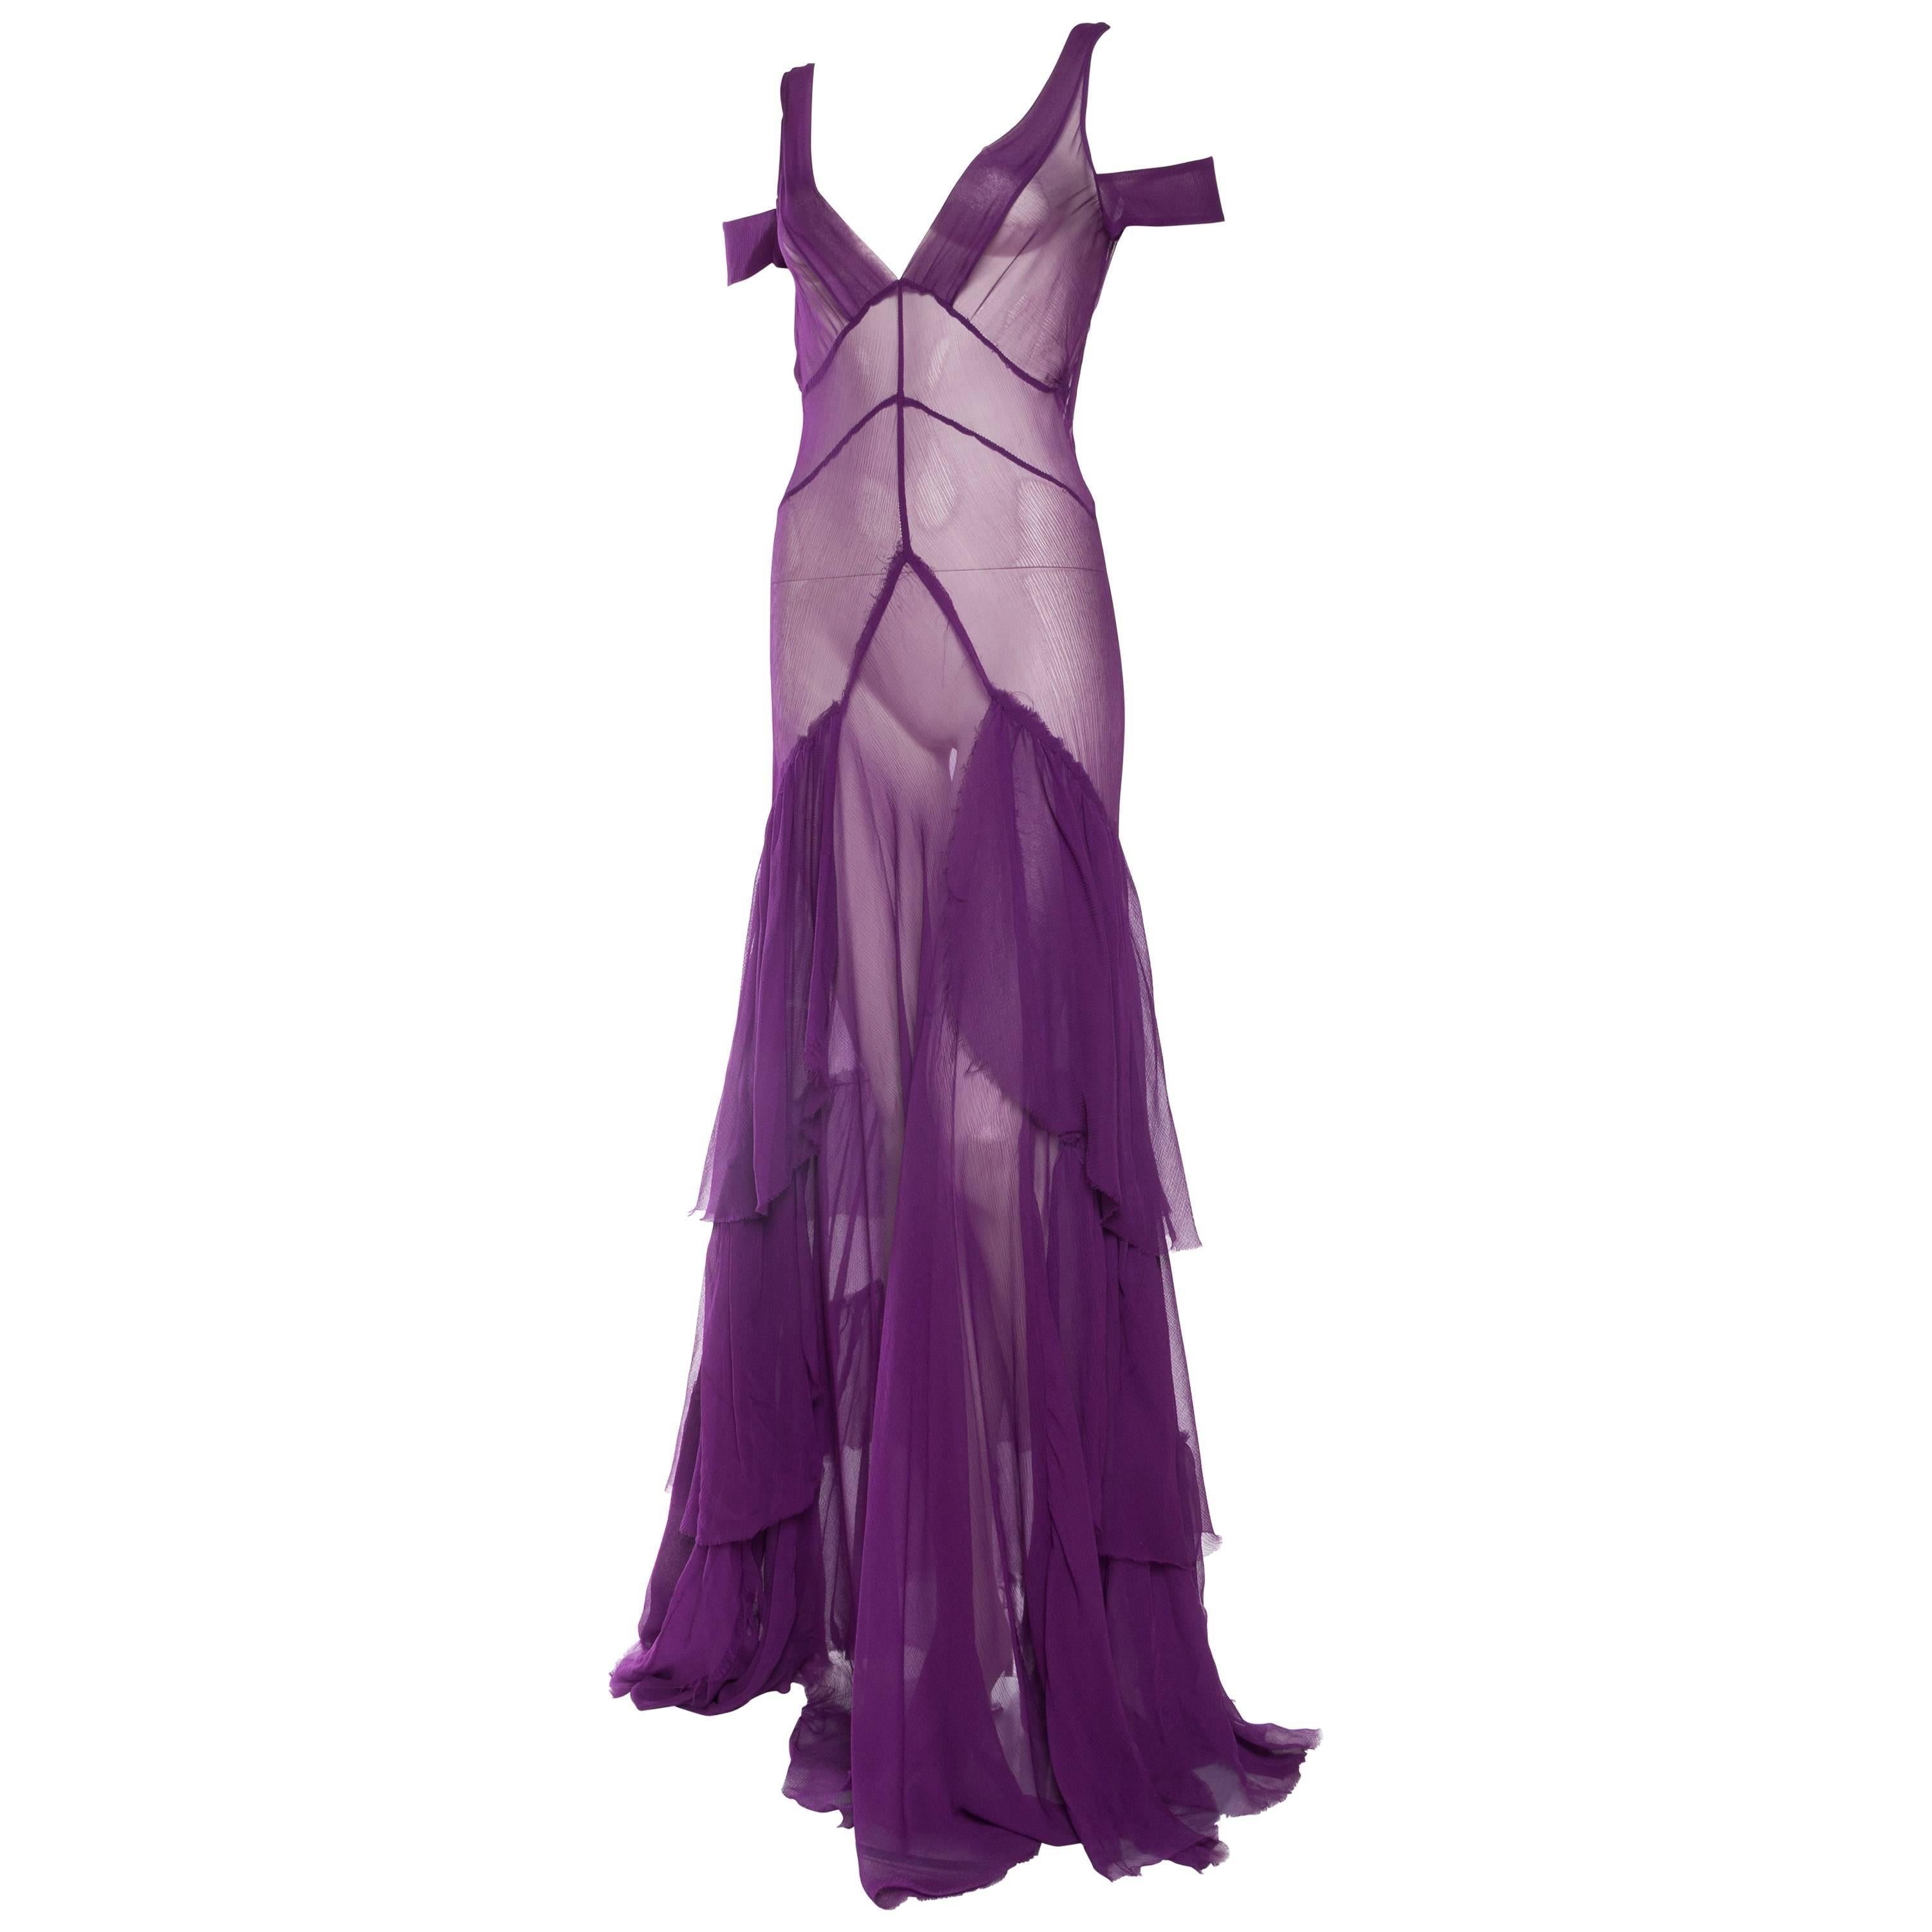 1930s Style Sheer Chiffon Gown